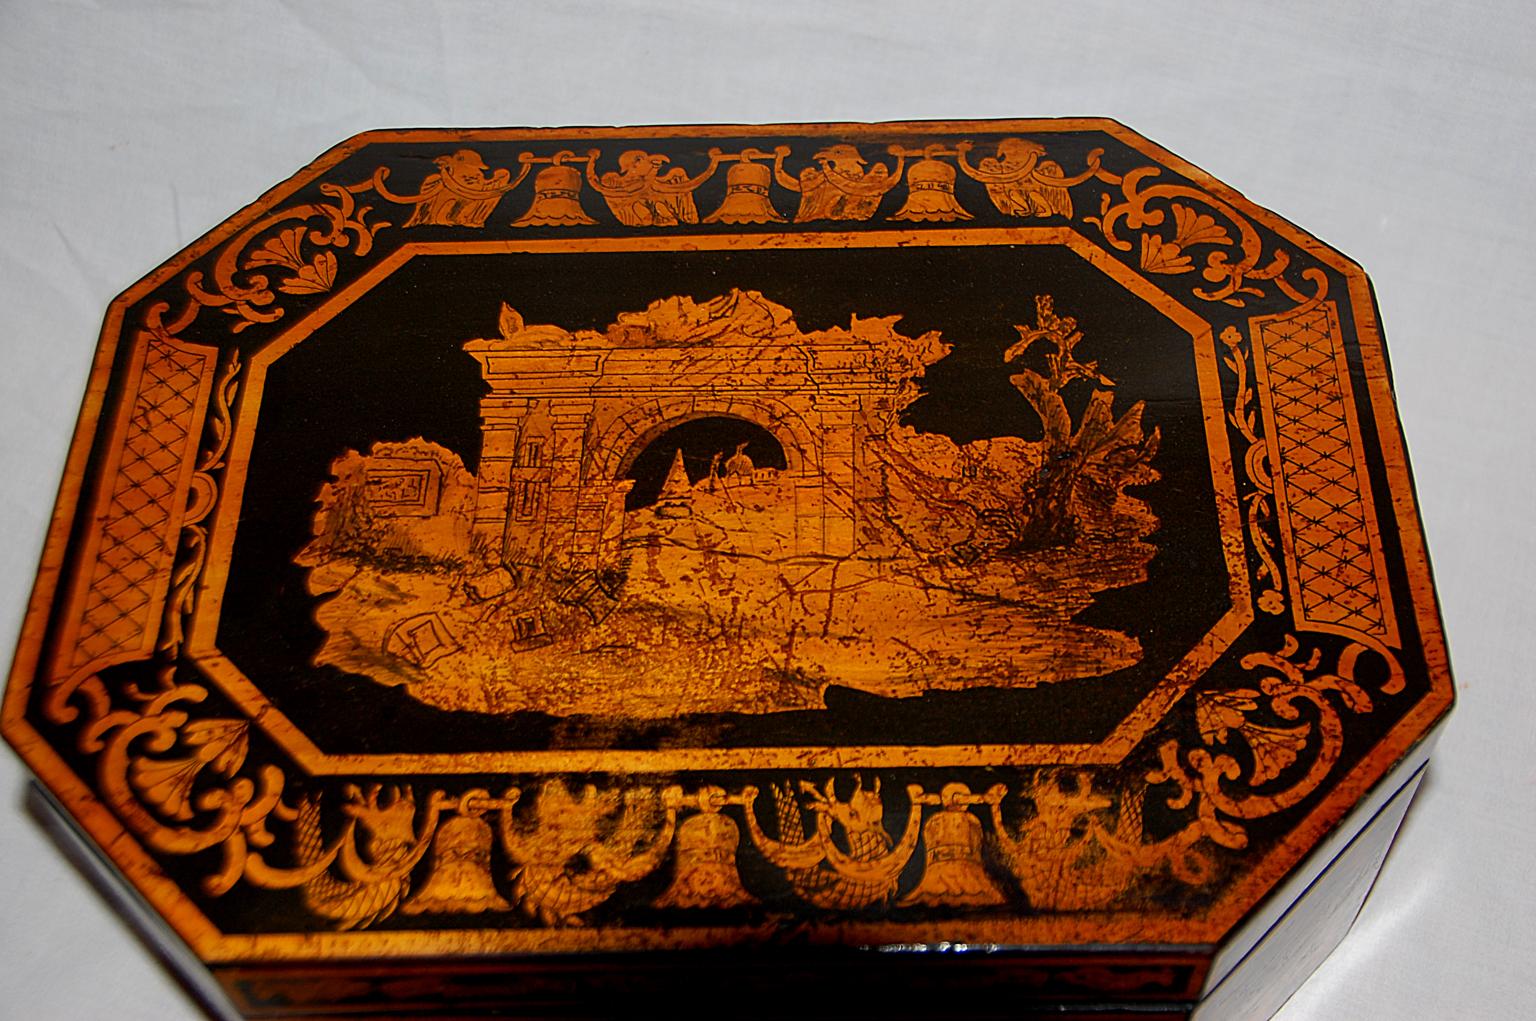 English Georgian penwork octagonal box with classical ruins on the lid and motifs from the great pyramids of Egypt in the borders and on the sides. After Horatio Nelson's victory in the Battle of the Nile in 1798, there was a flurry of decorative